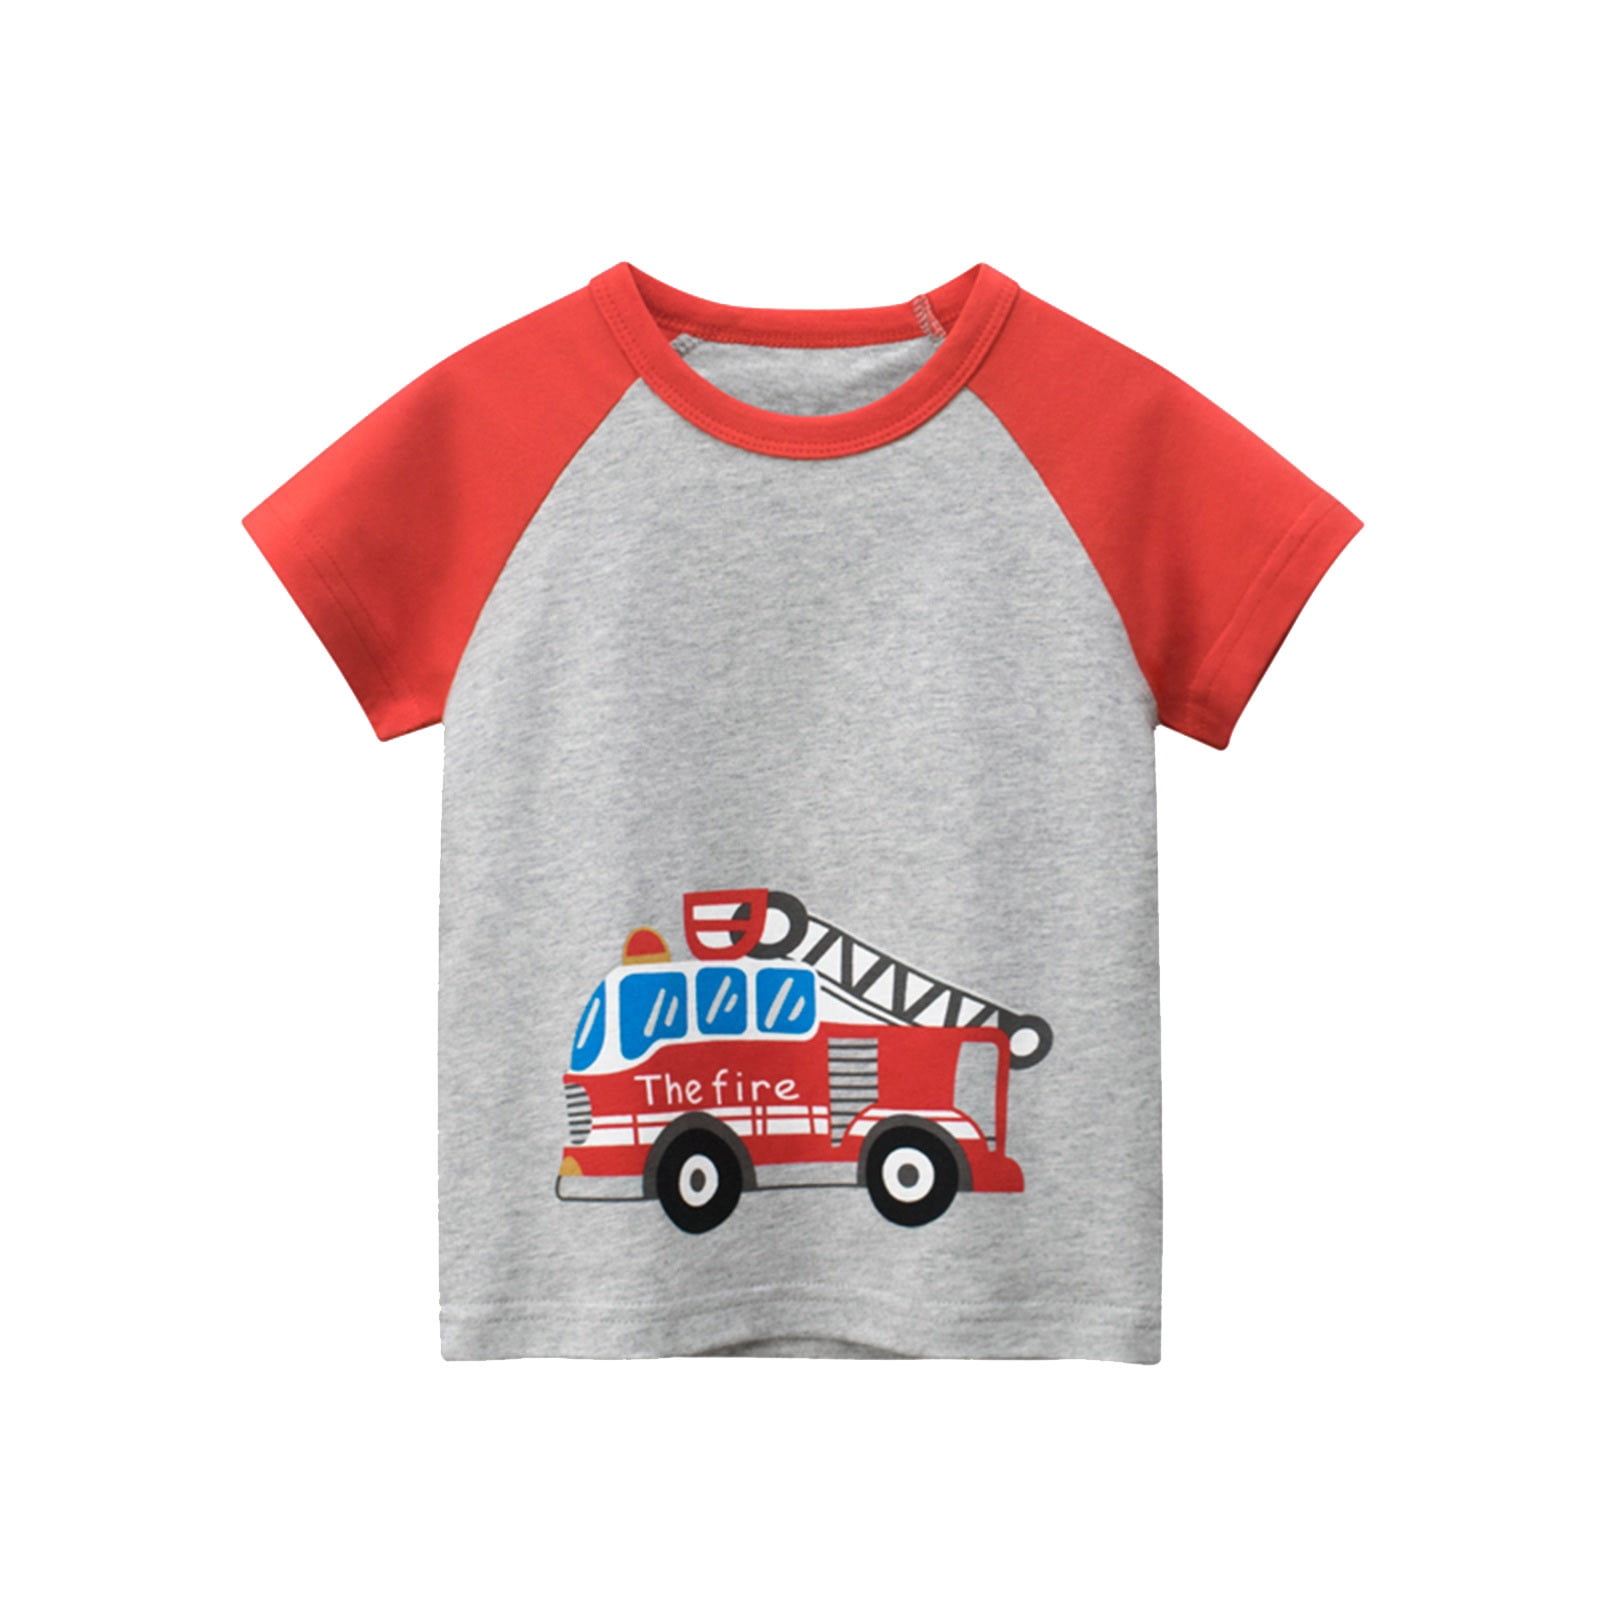 HIBRO Youth Boys Size Small Clothes Toddler Kids Girls Boys Cartoon Car  Prints Loose Tops Soft Short Sleeve T Shirt Tee Tops Clothes 